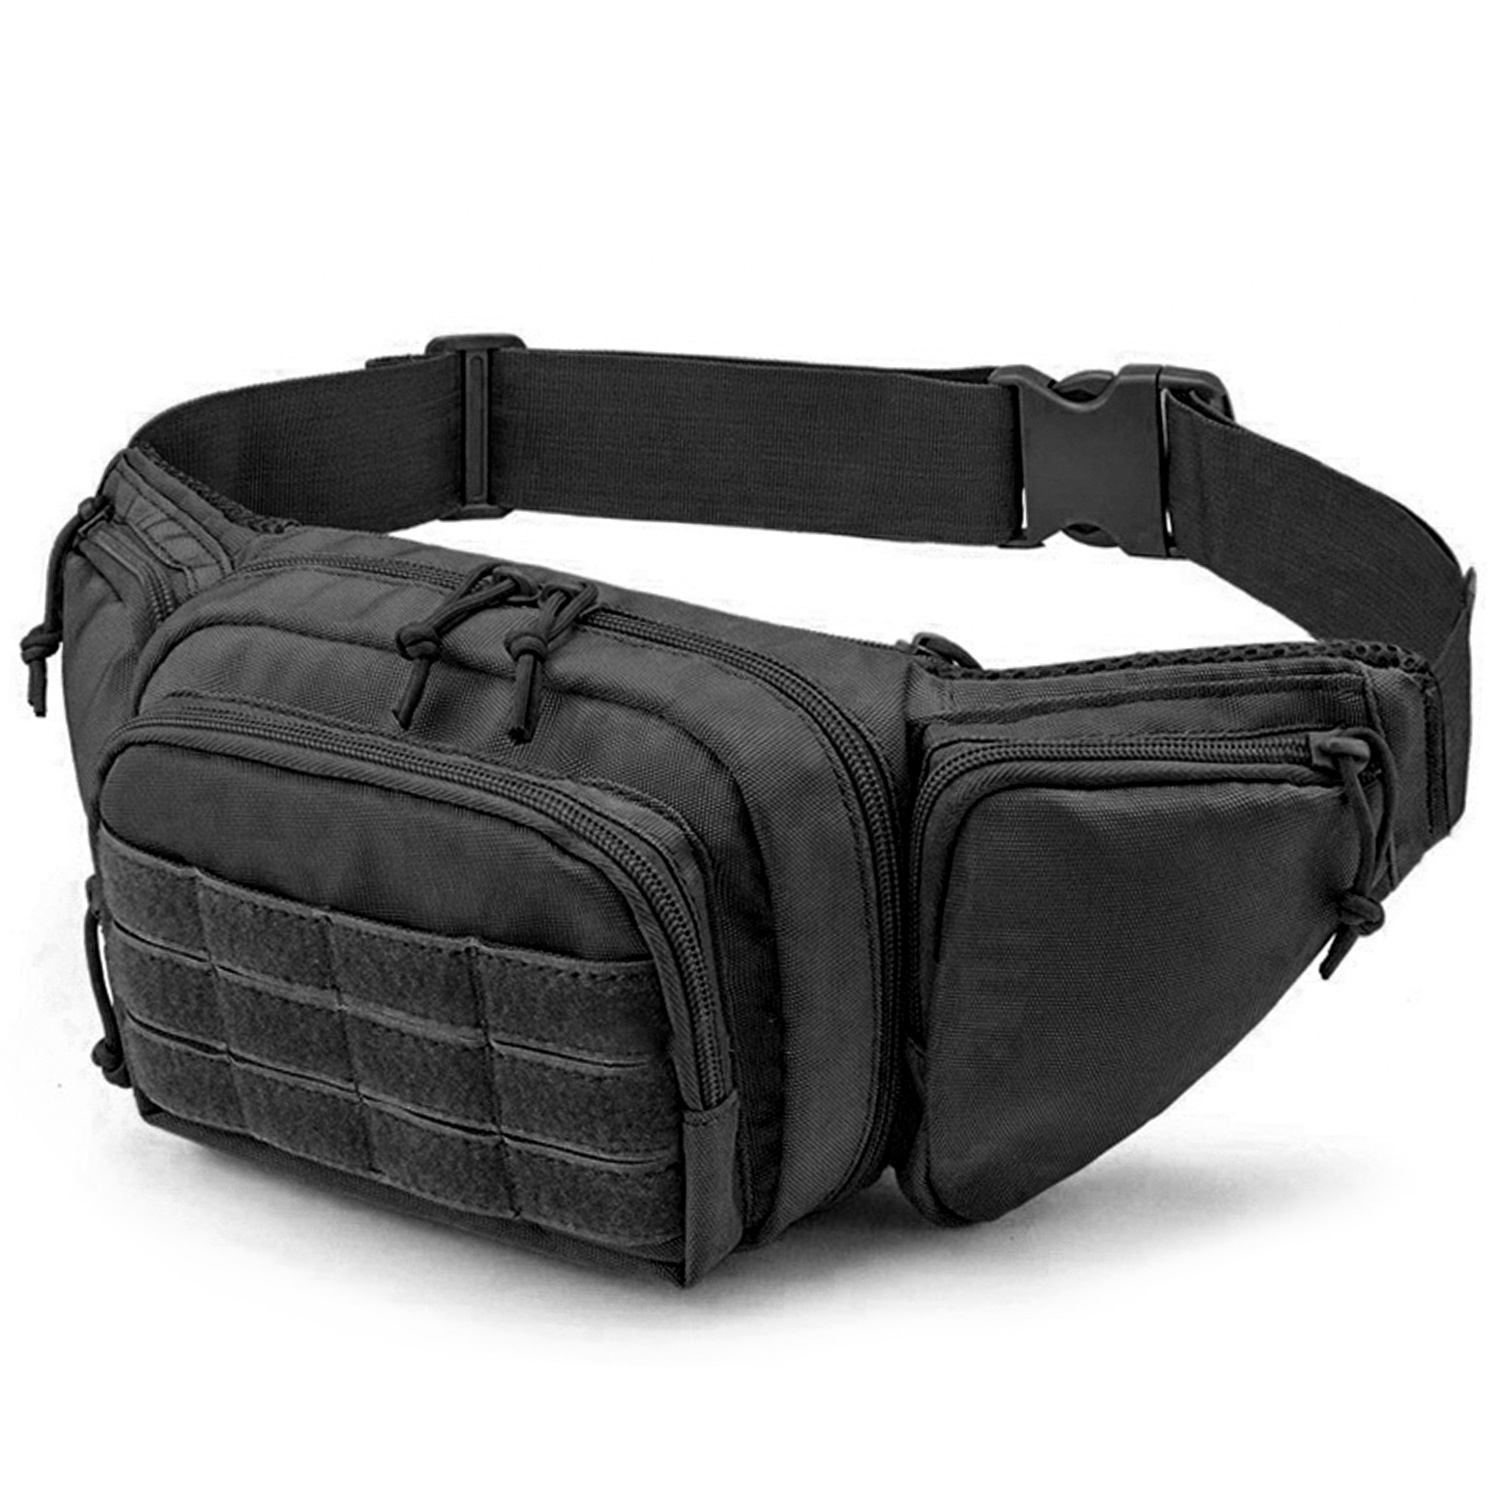 Fast Shipping Authentic goods are sold online Tactical Concealed Carry ...